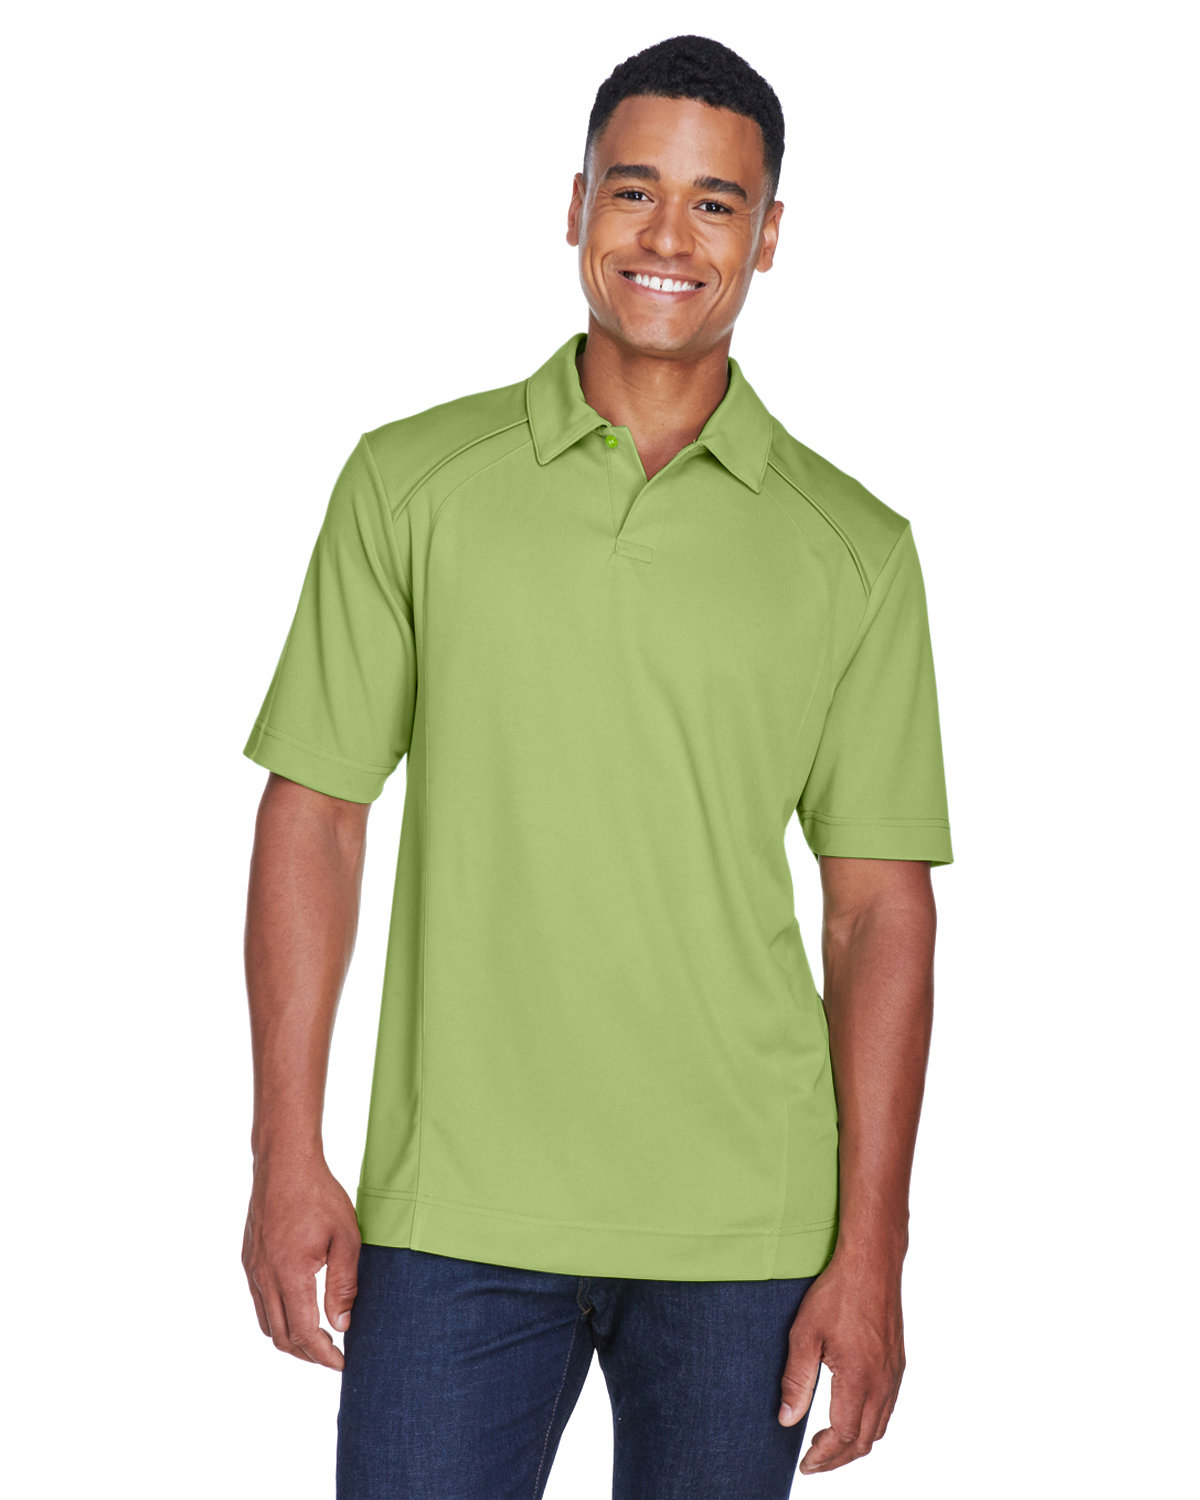 North End Men's Recycled Polyester Performance Piqué Polo CACTUS GREEN 